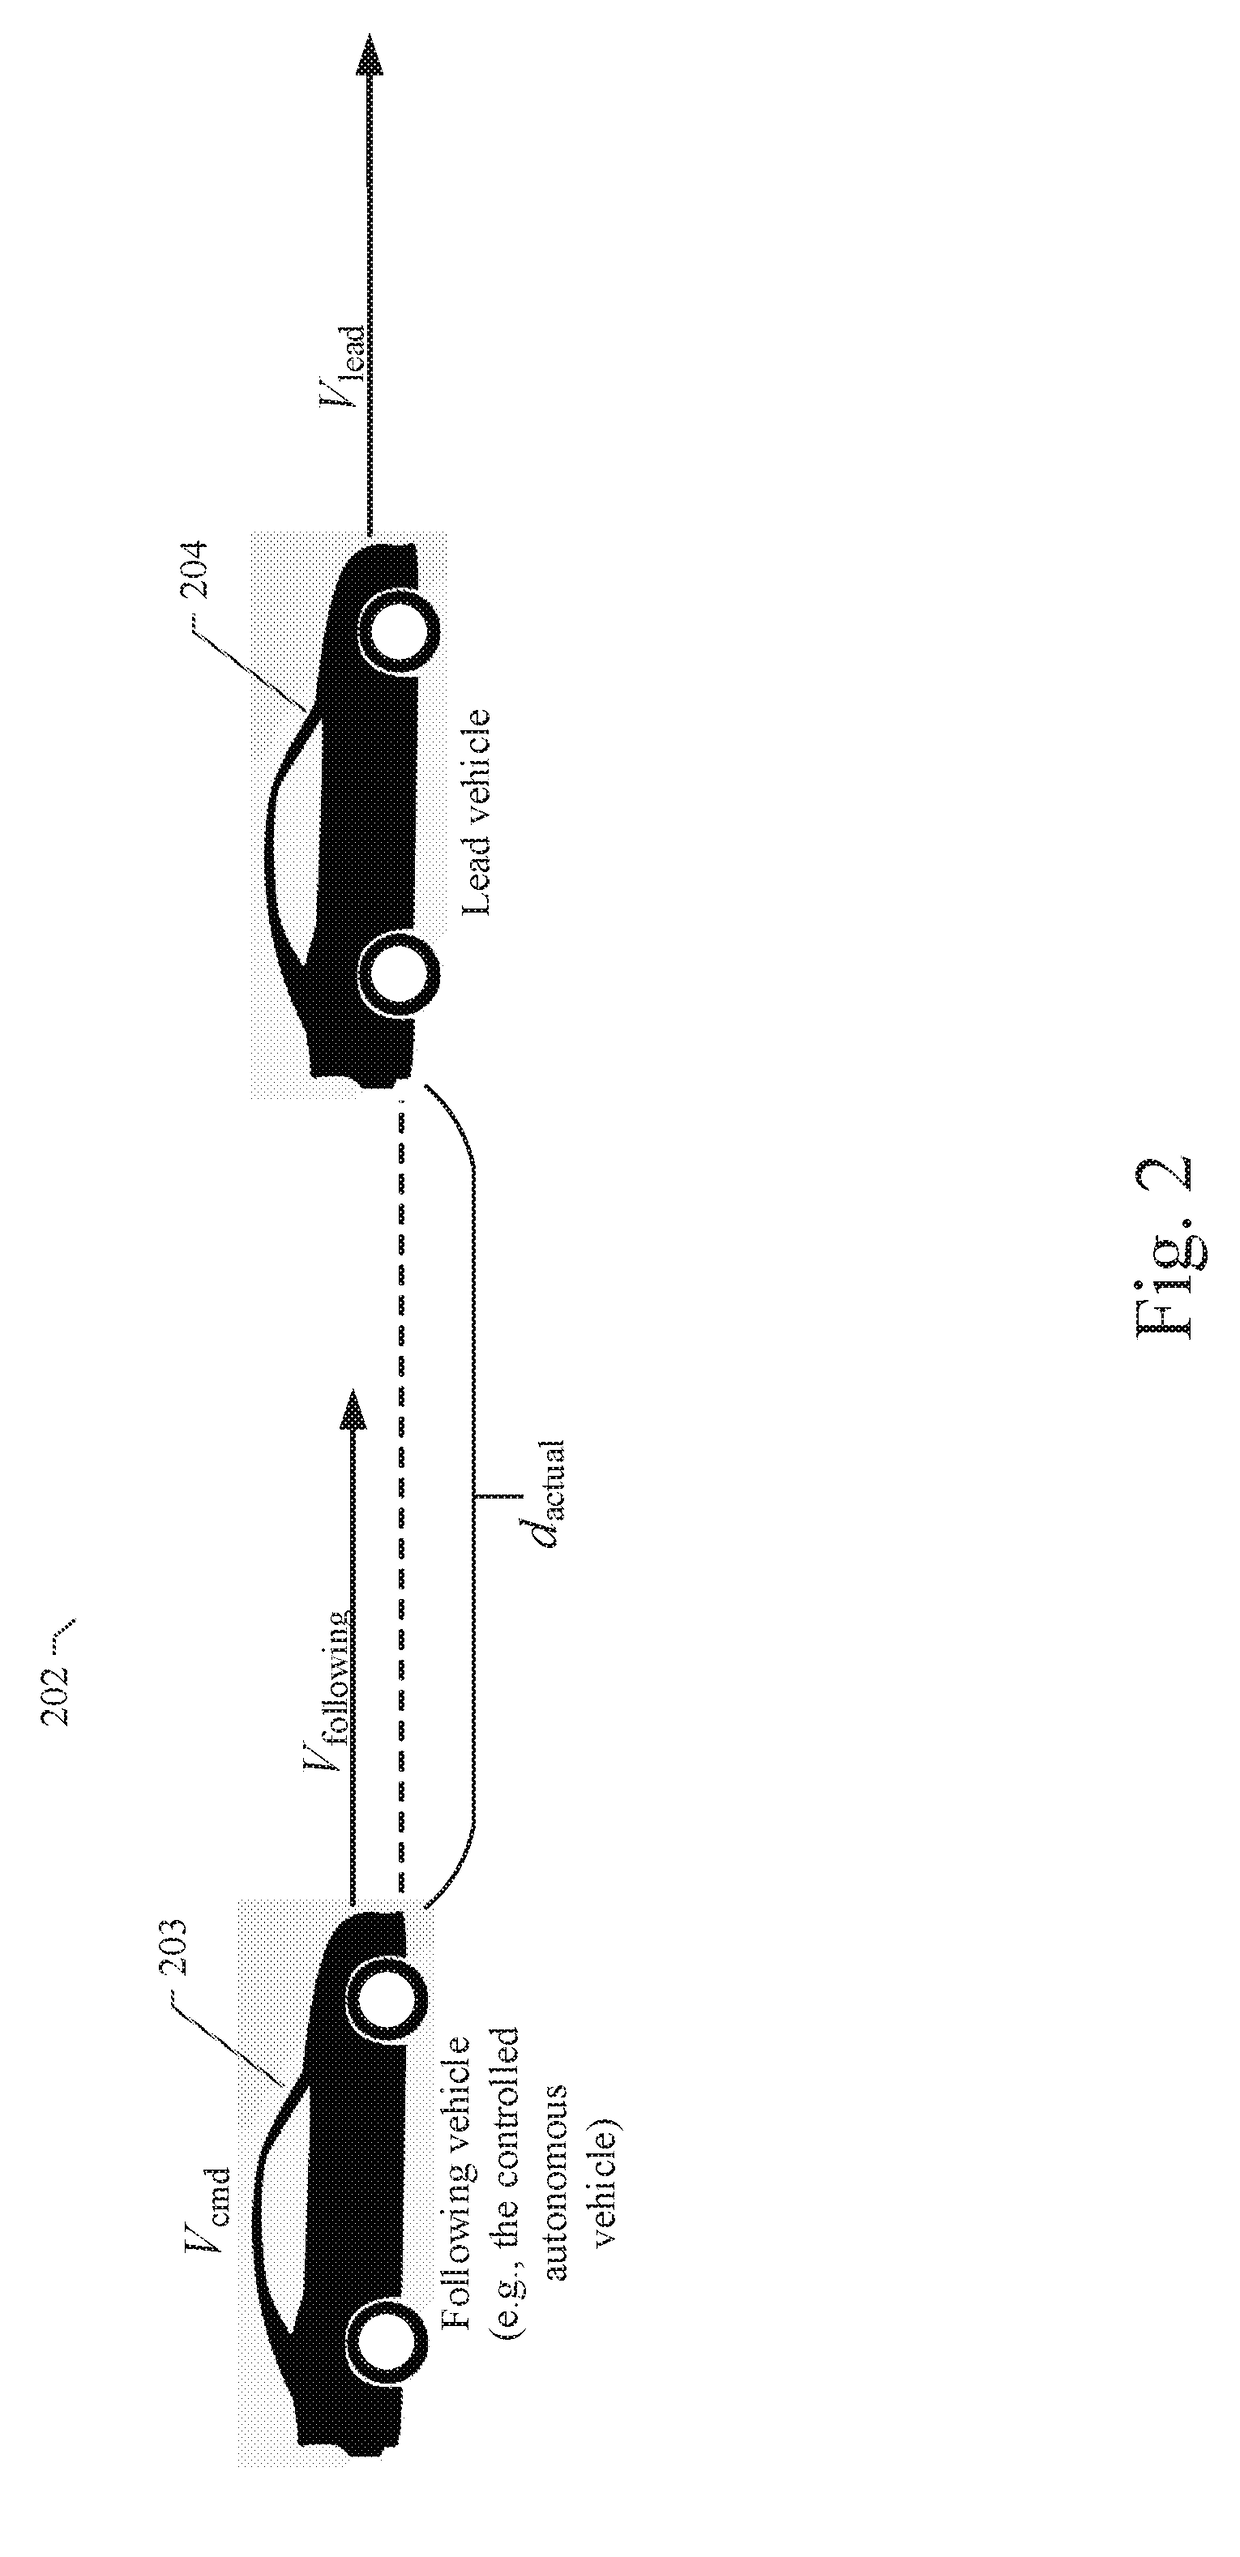 System and method for adaptive cruise control for low speed following